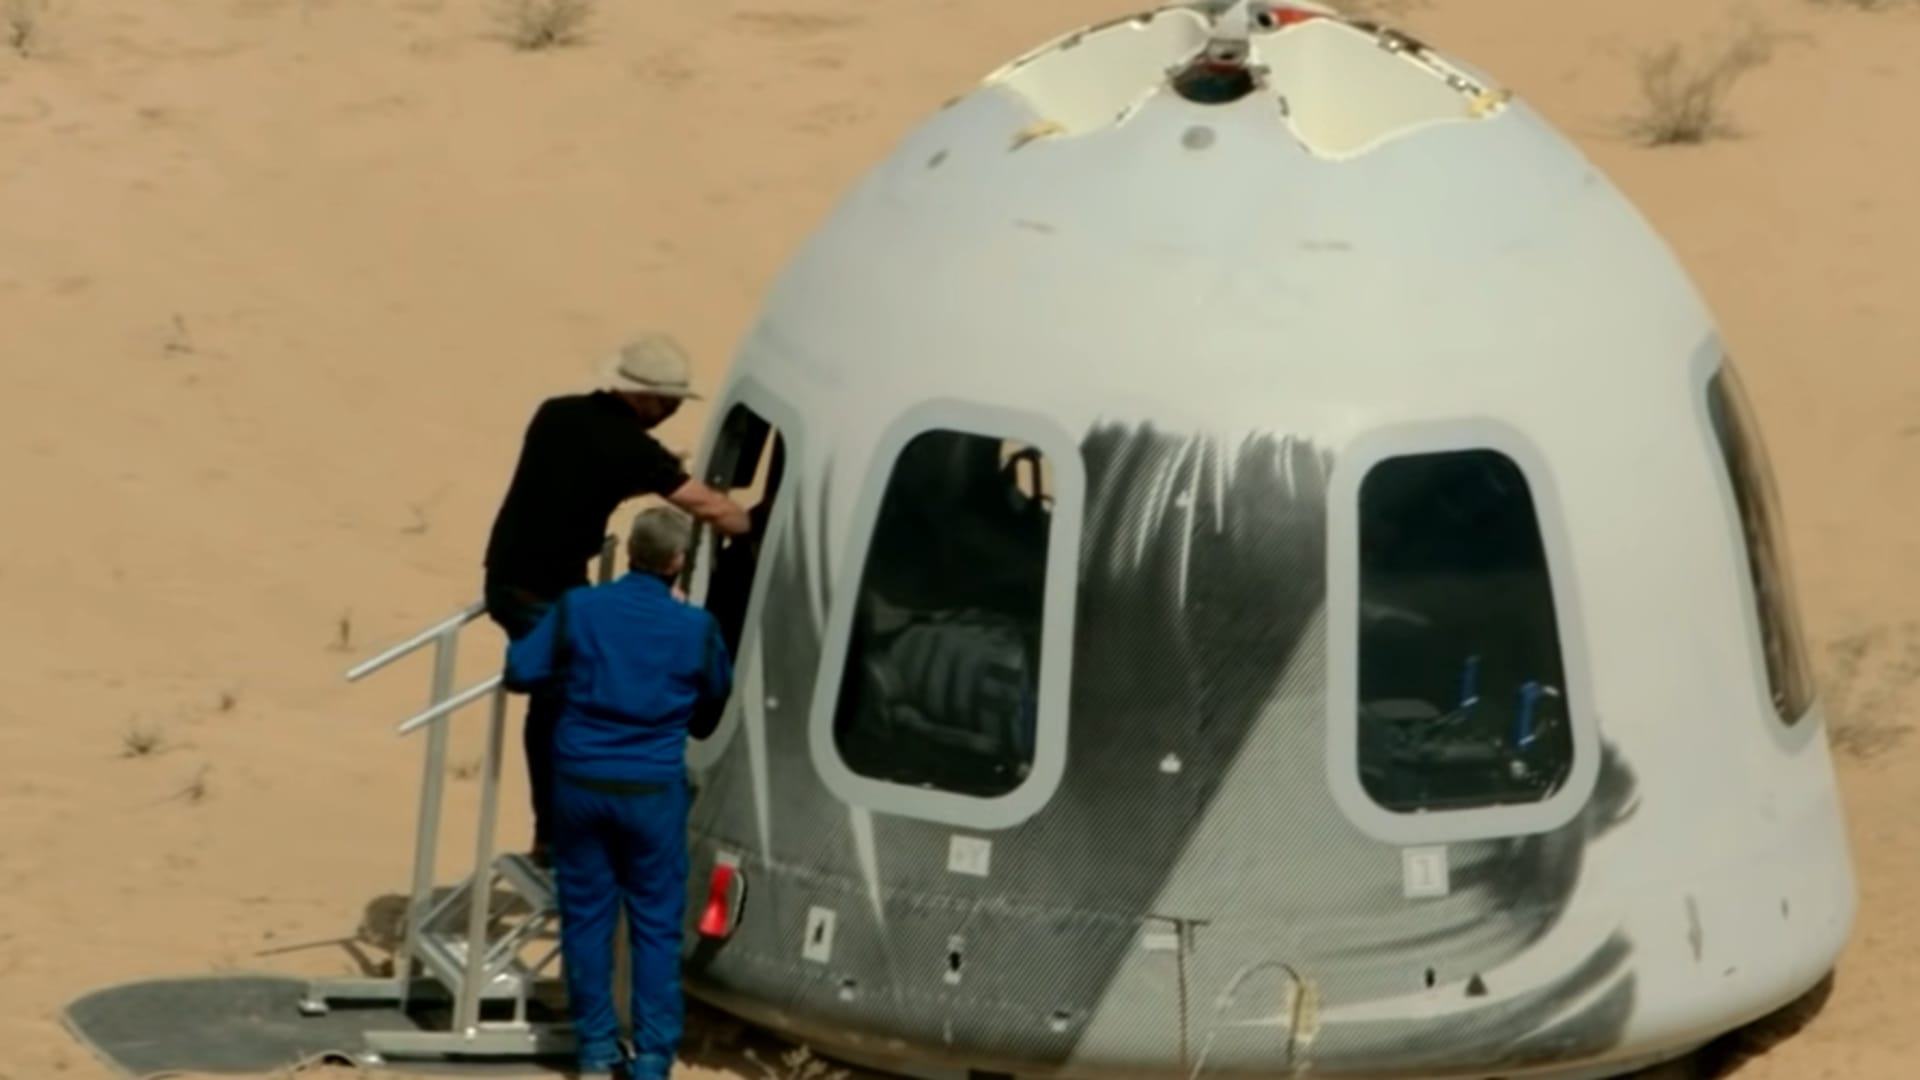 Jeff Bezos opens the hatch of a New Shepard capsule after an uncrewed test flight on April 14, 2021.